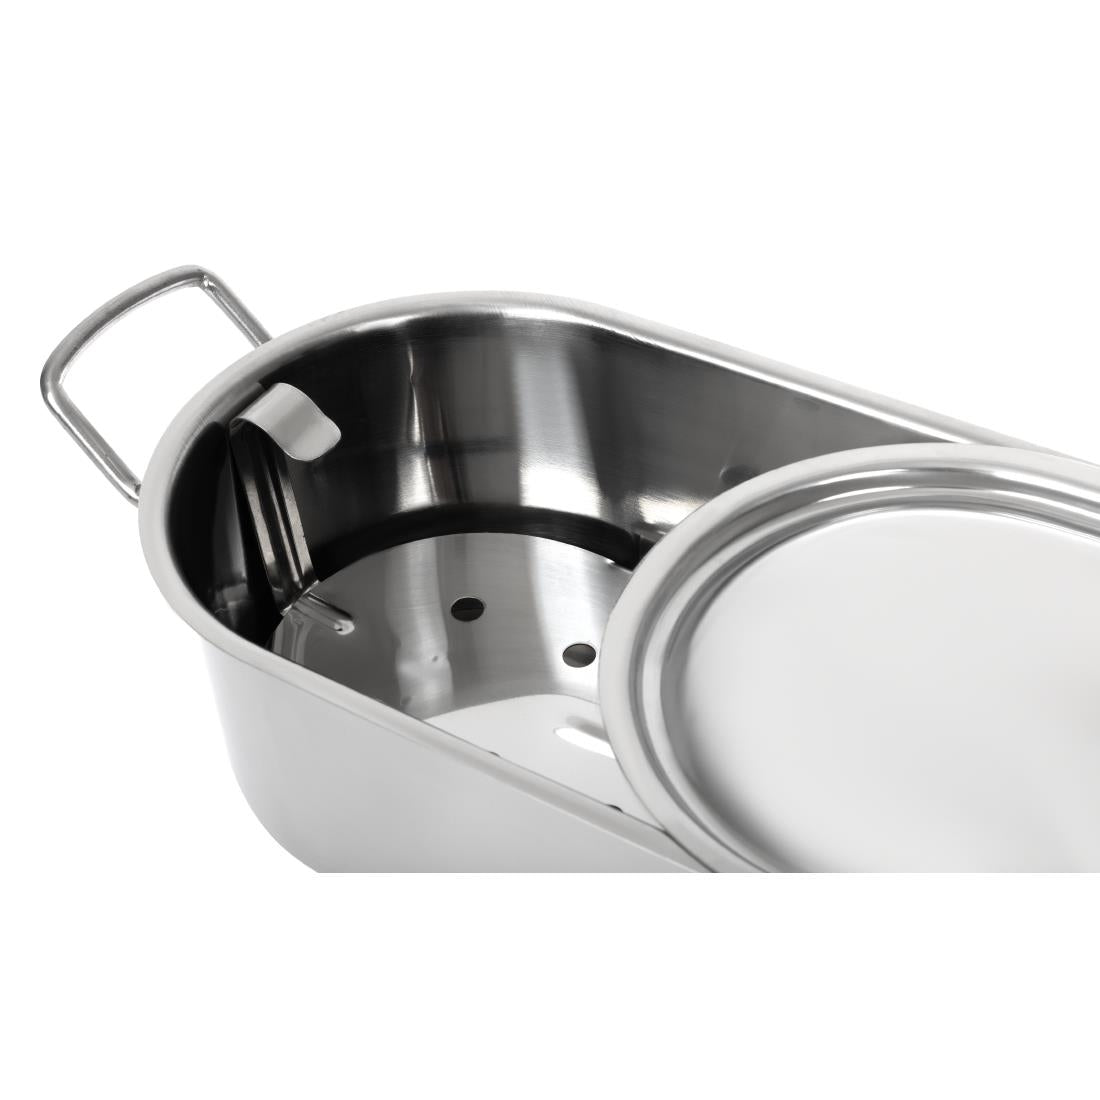 Kitchen Craft Stainless Steel Fish Kettle 620mm JD Catering Equipment Solutions Ltd